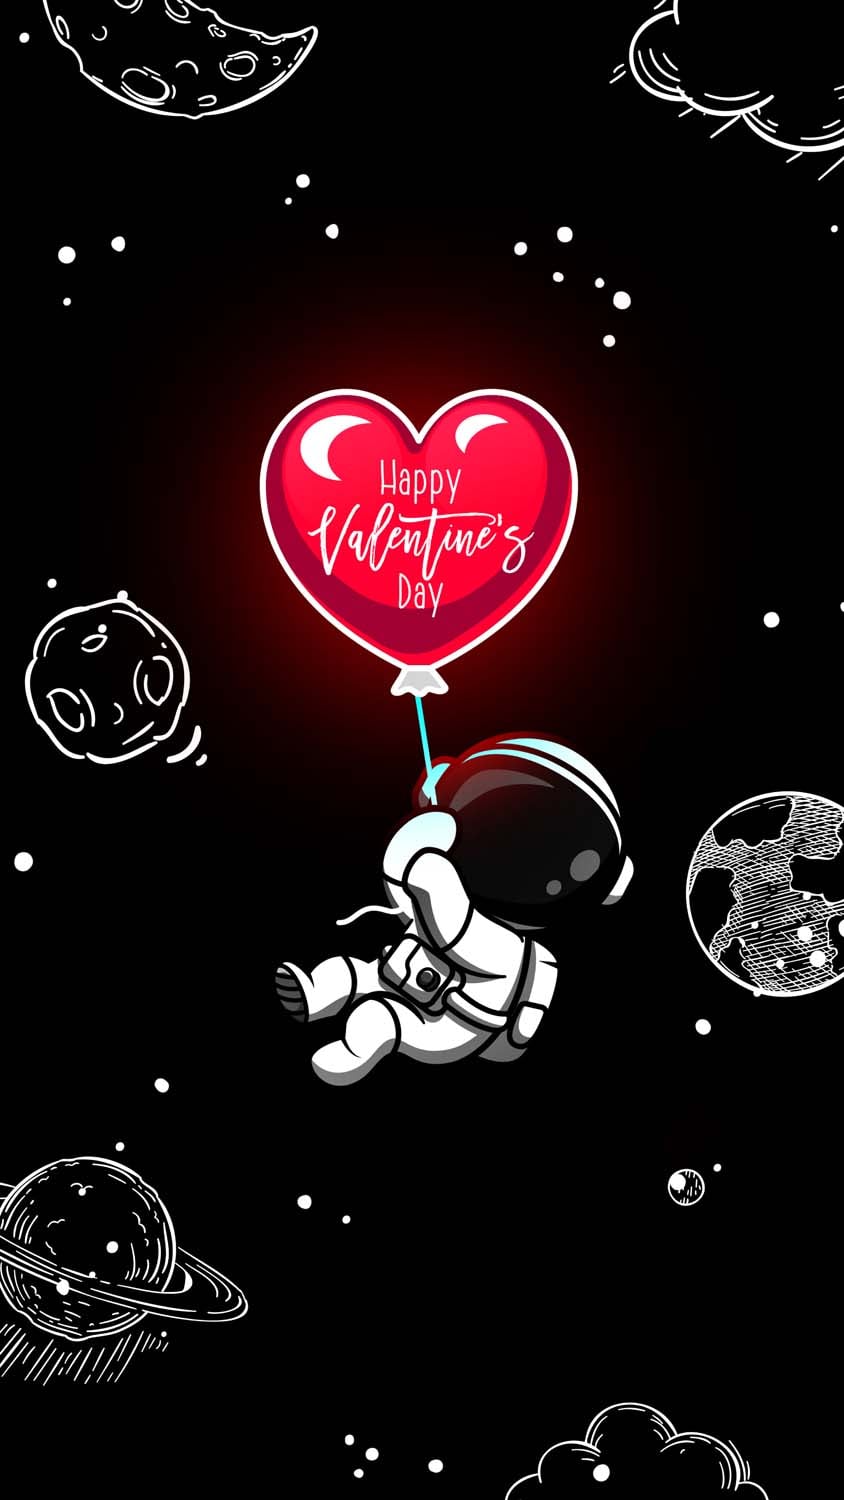 Happy Valentines Day From Space IPhone Wallpaper HD - IPhone Wallpapers : iPhone  Wallpapers